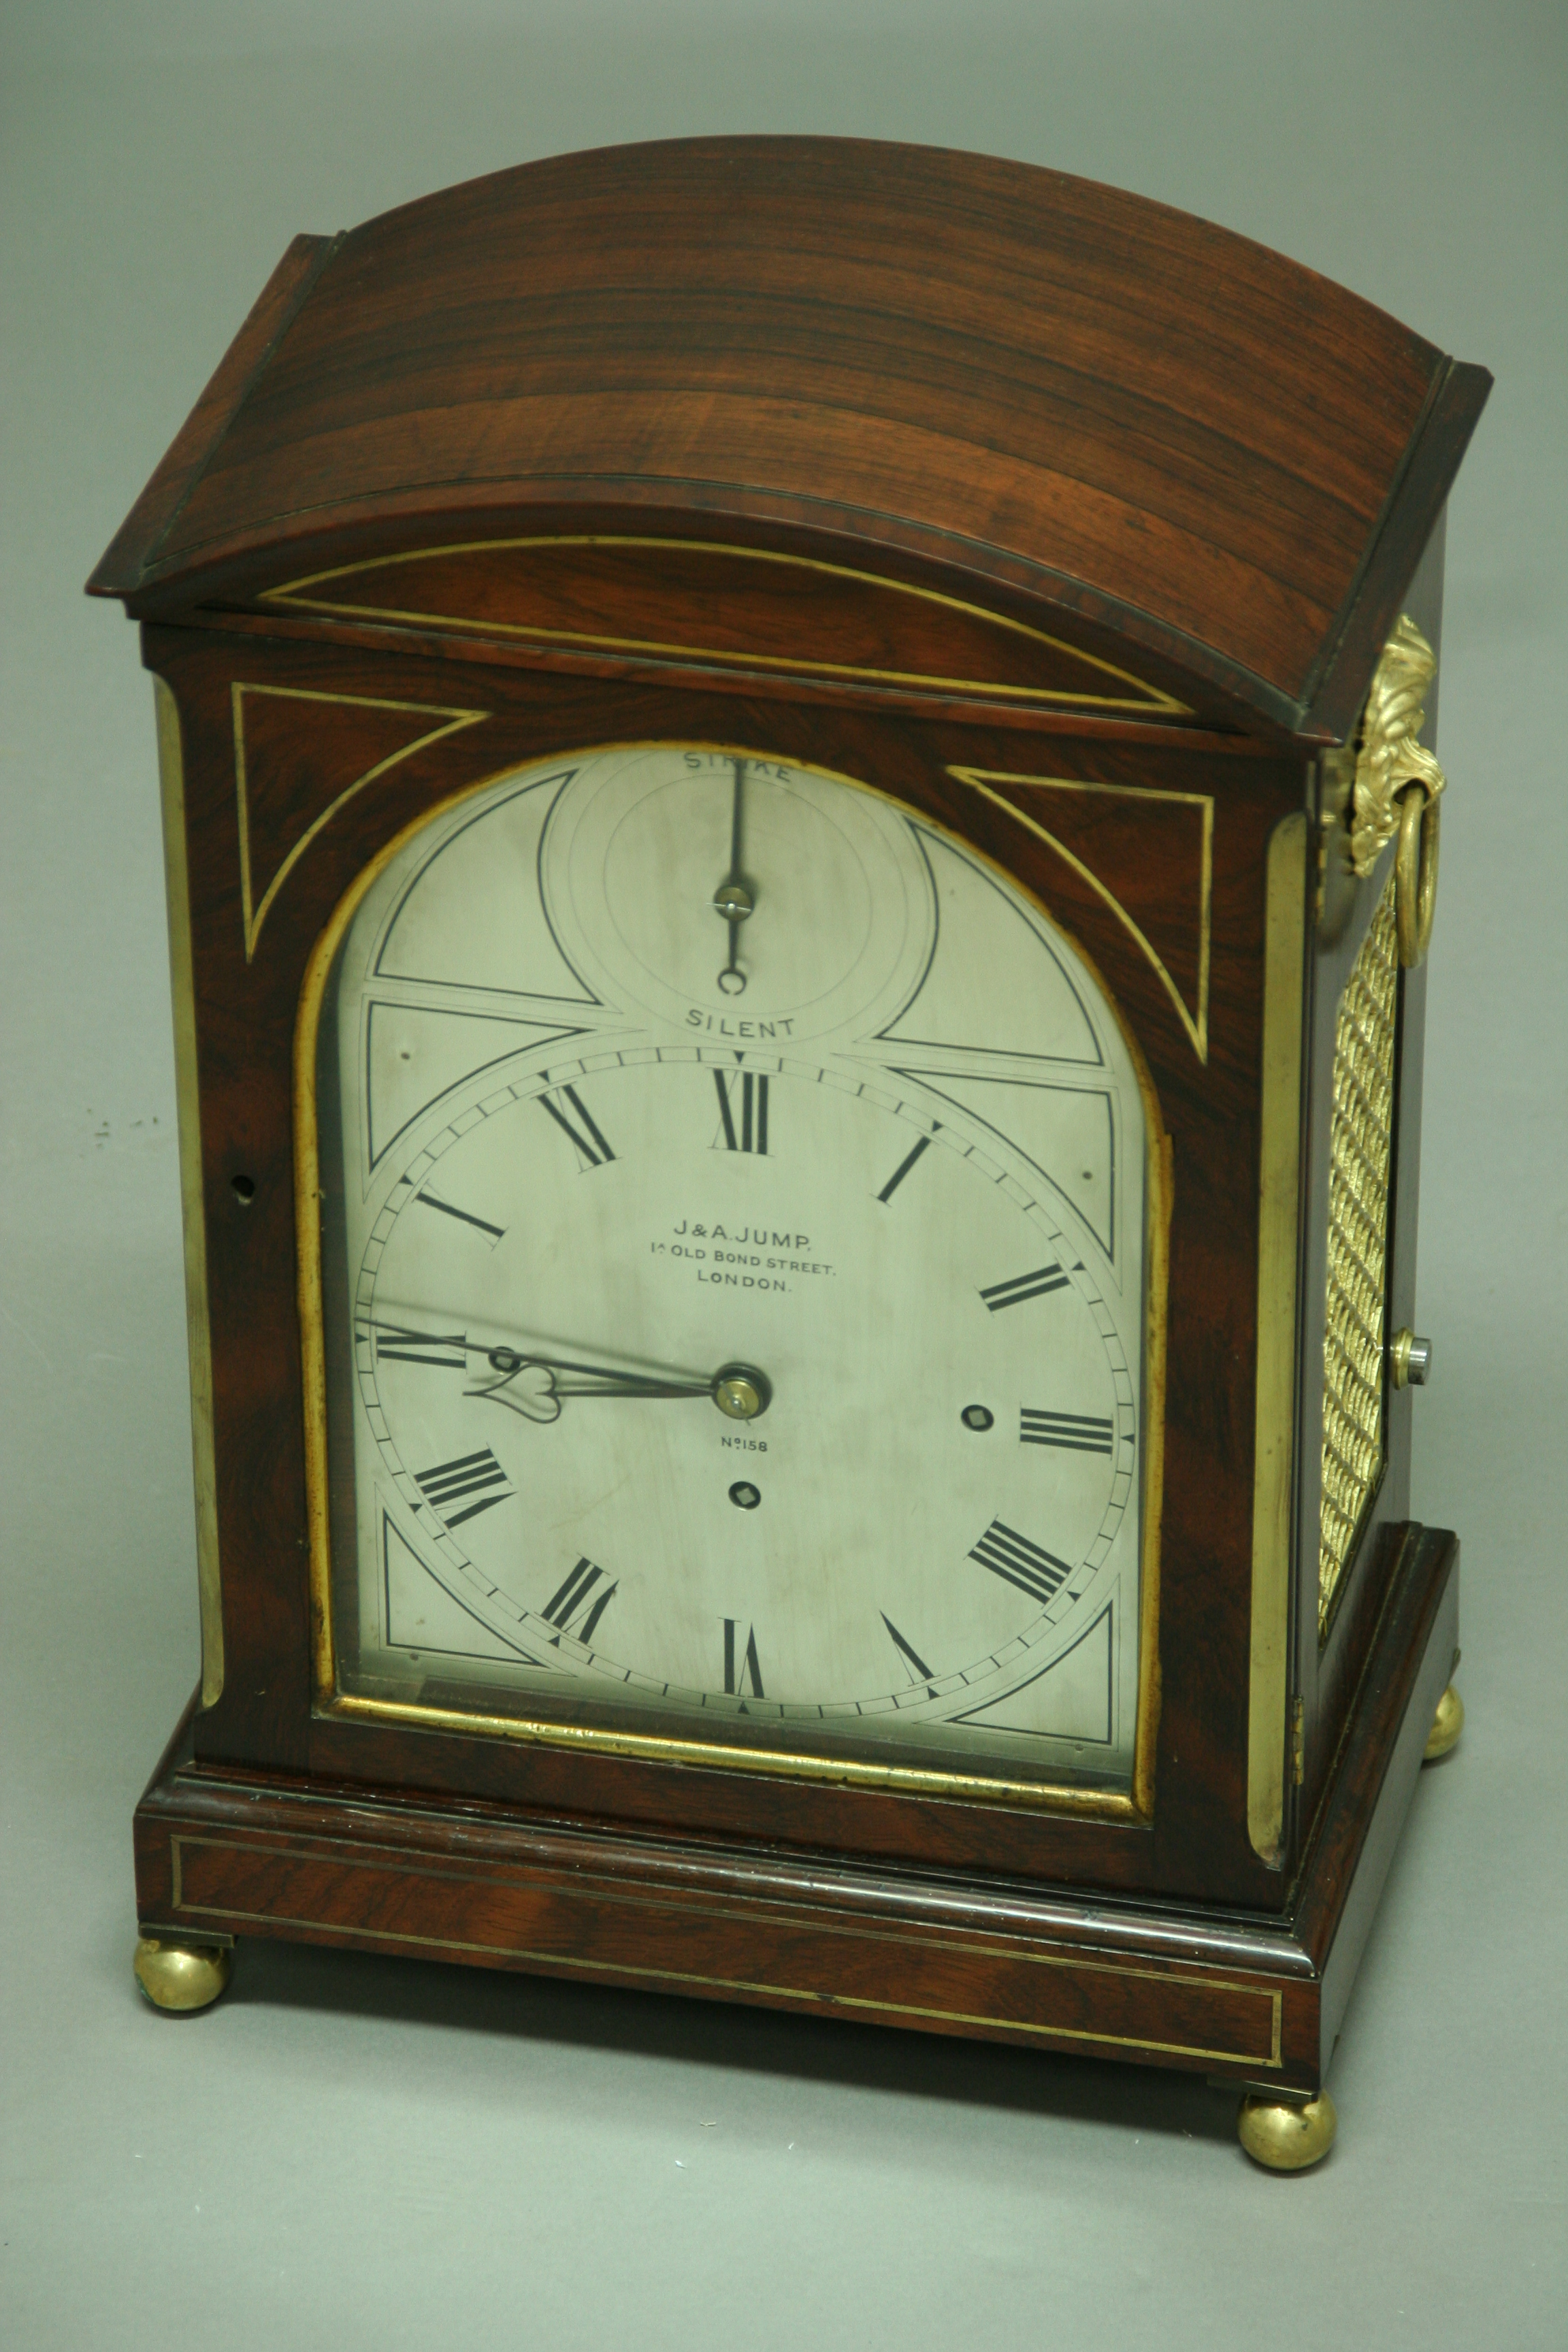 A J. & A. JUMP BRACKET CLOCK mid-late 19th Century with brass triple chain fusee movement chiming